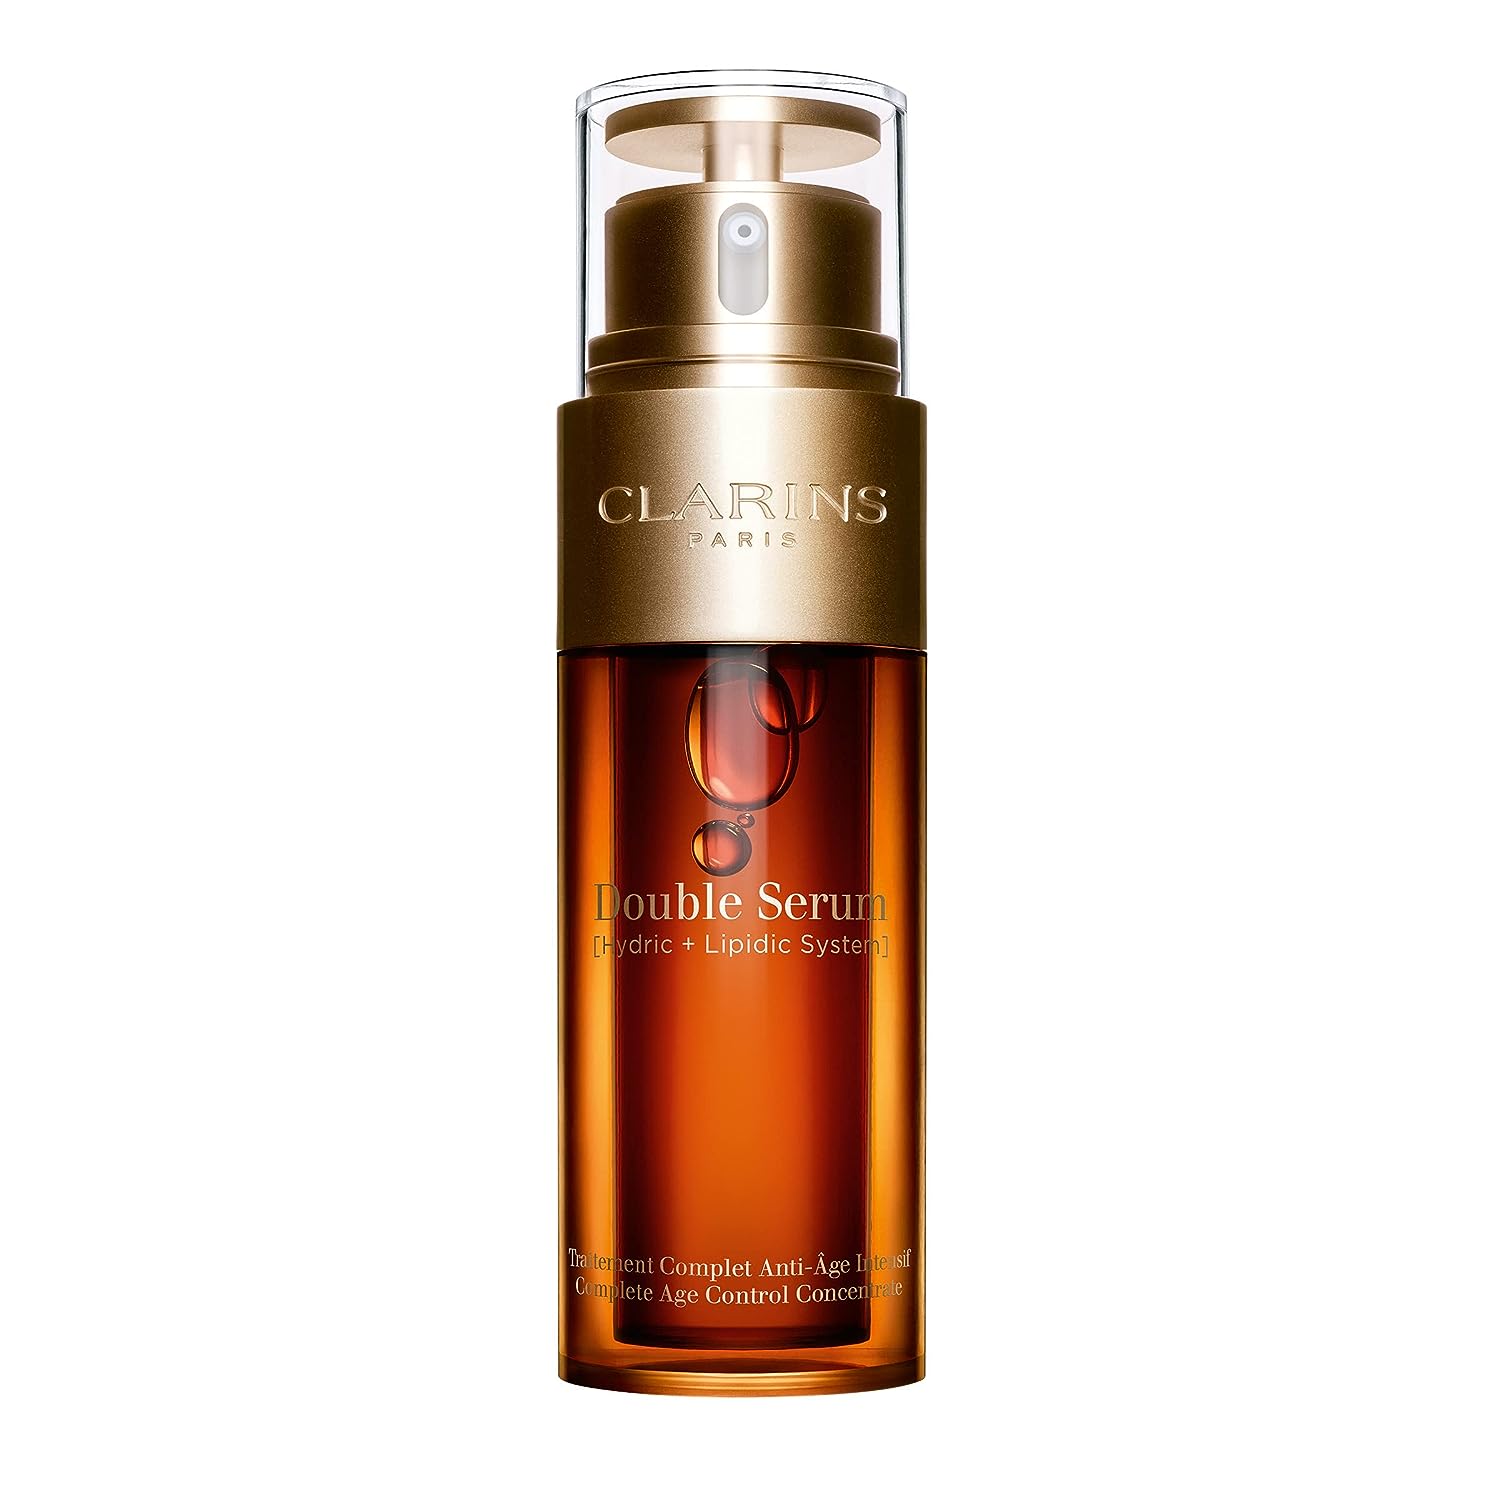 Clarins Double Serum | Anti-Aging | Visibly Firms, Smoothes and Boosts Radiance in Just 7 Days* | 21 Plant Ingredients, Including Turmeric | All Skin Types, Ages and Ethnicities